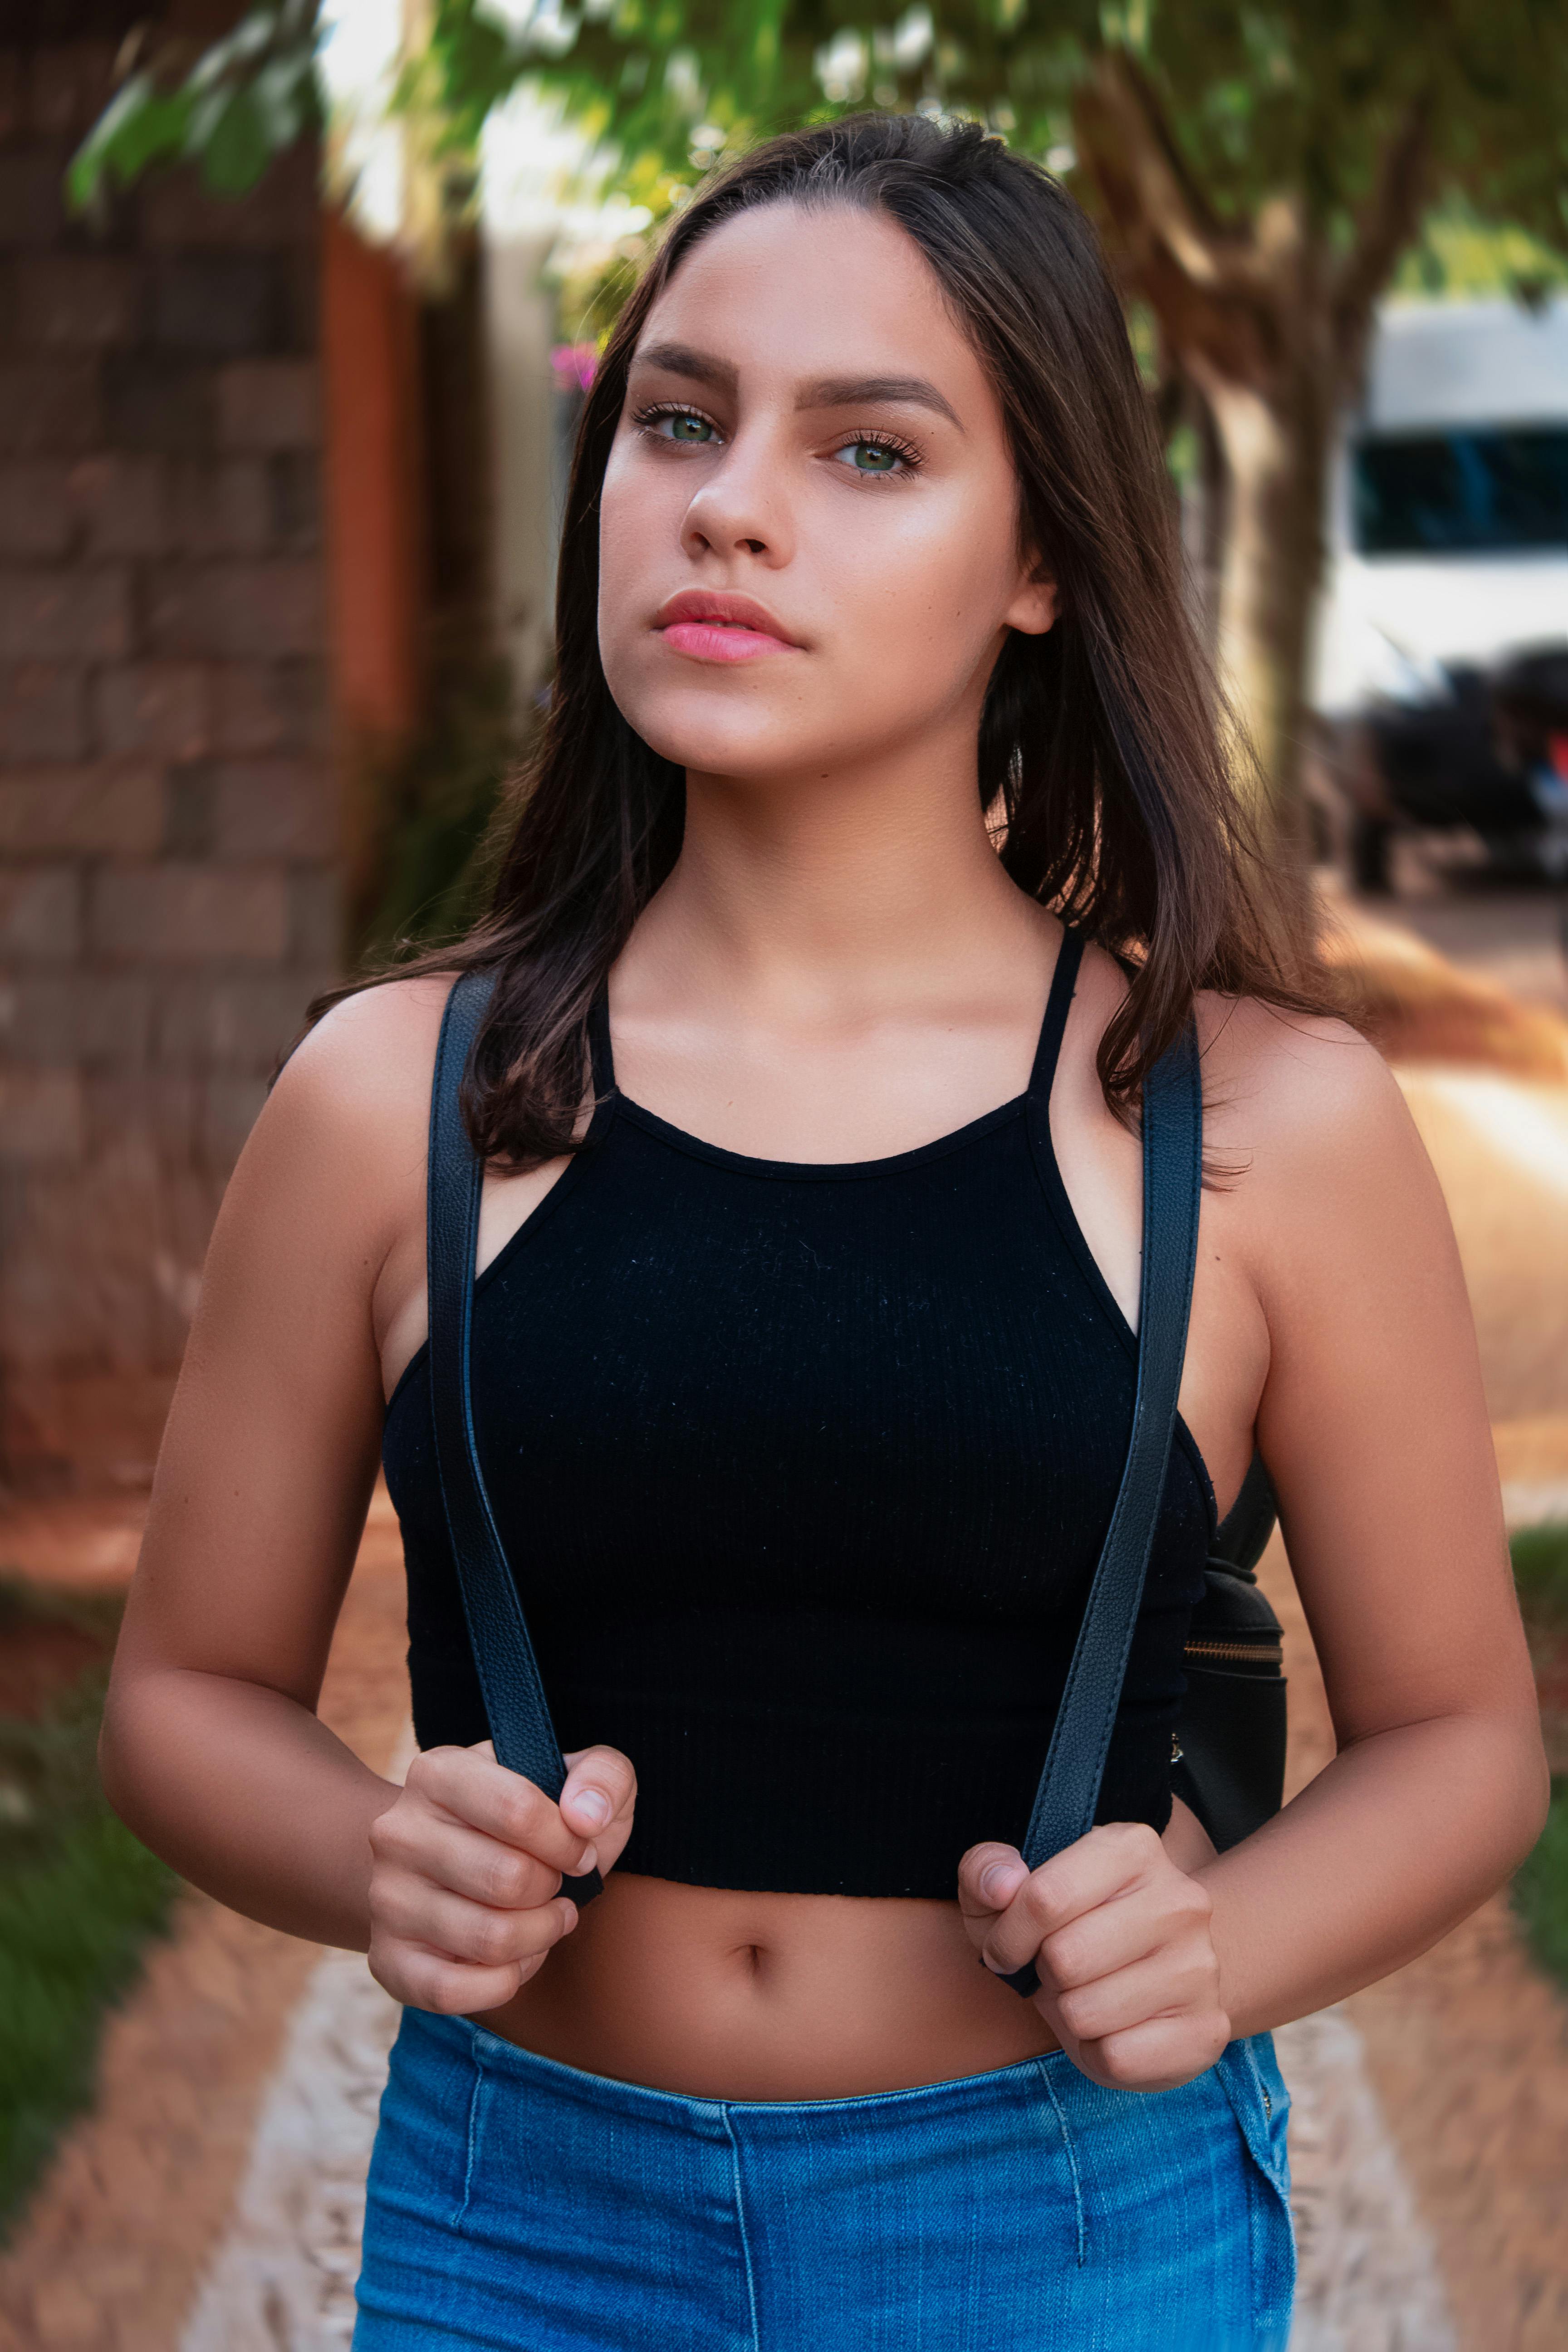 Situation nødvendighed Klappe Woman Wearing Black Spaghetti Strap Crop Top · Free Stock Photo